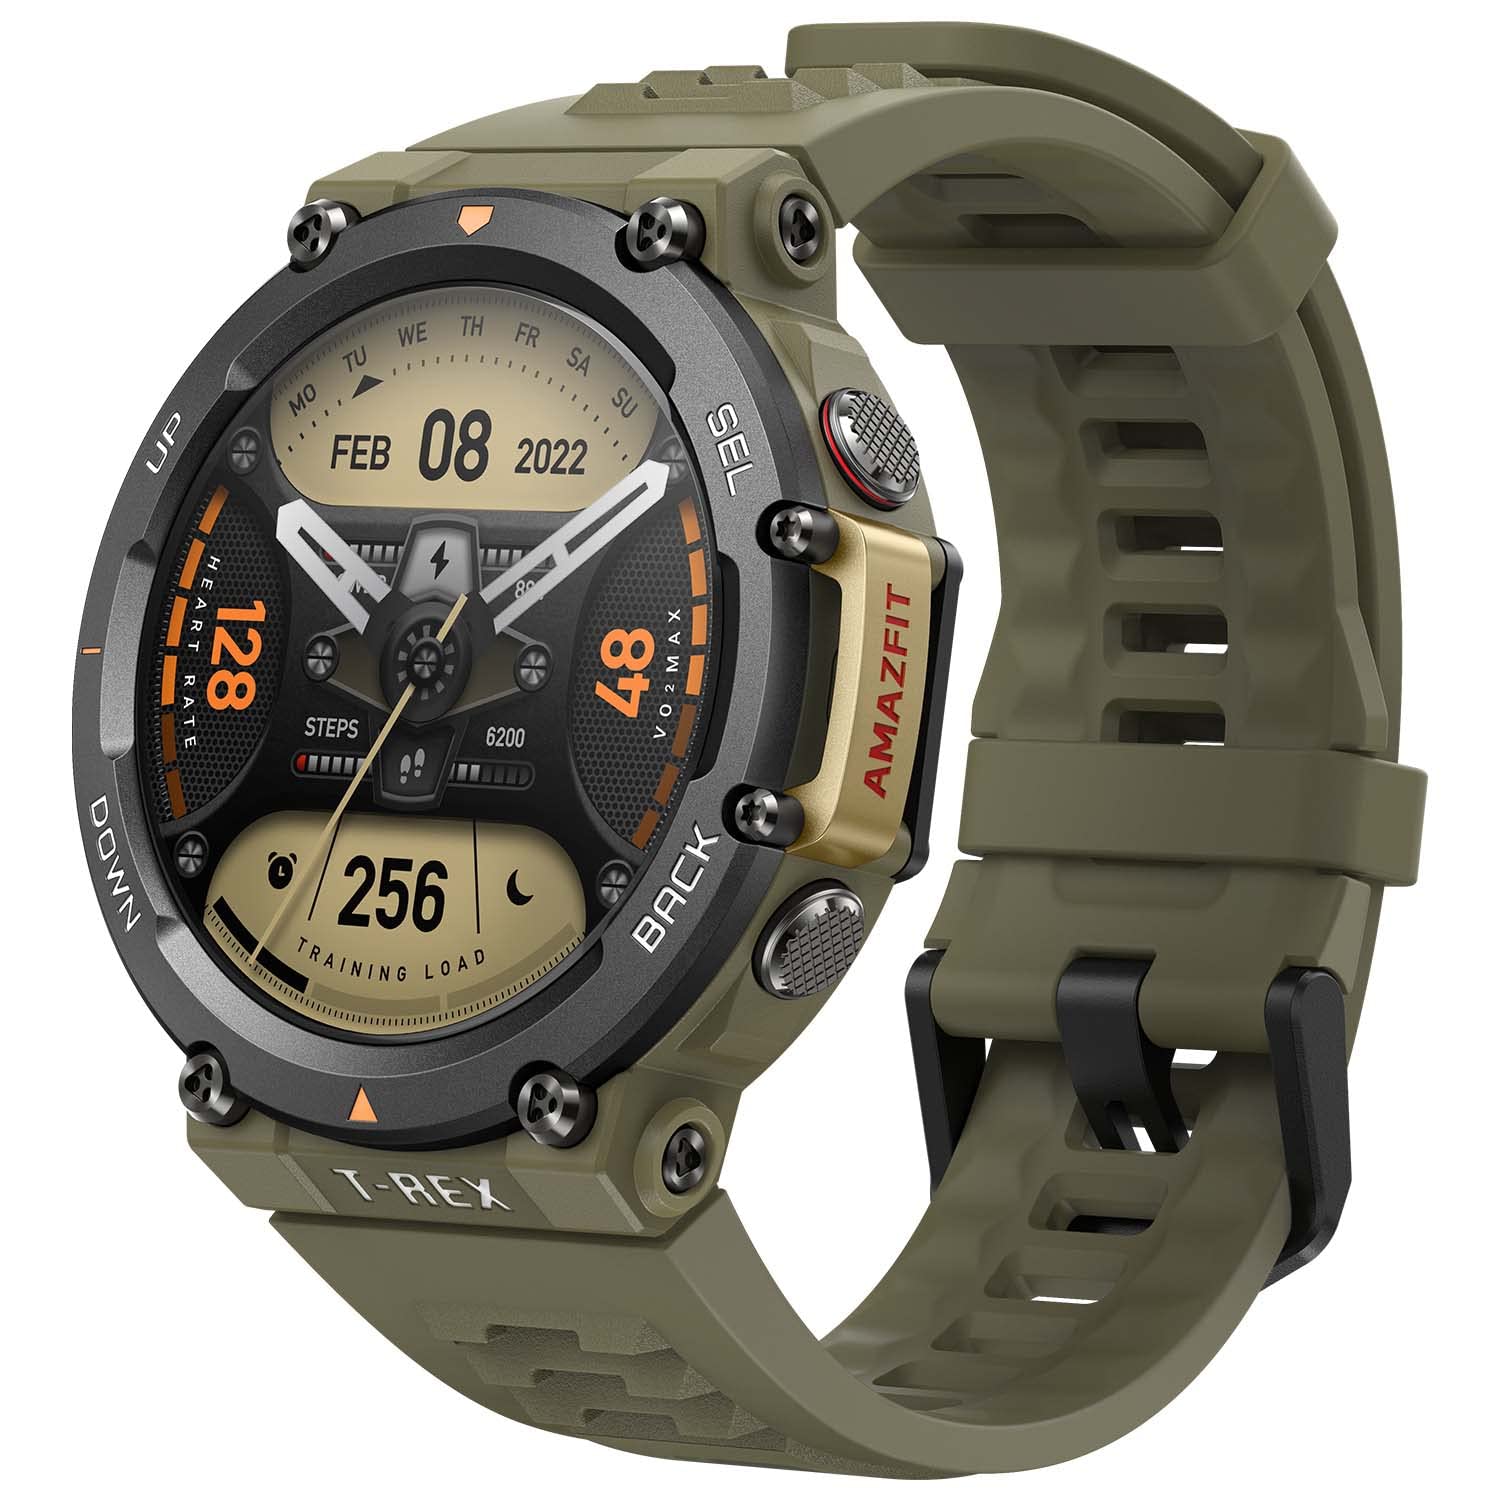 Amazfit T-Rex 2 Smart Watch for Men, Dual-Band & 6 Satellite Positioning, 24-Day Battery Life, Ultra-Low Temperature Operation, Rugged Outdoor GPS Military Smartwatch, Real-time Navigation-Green